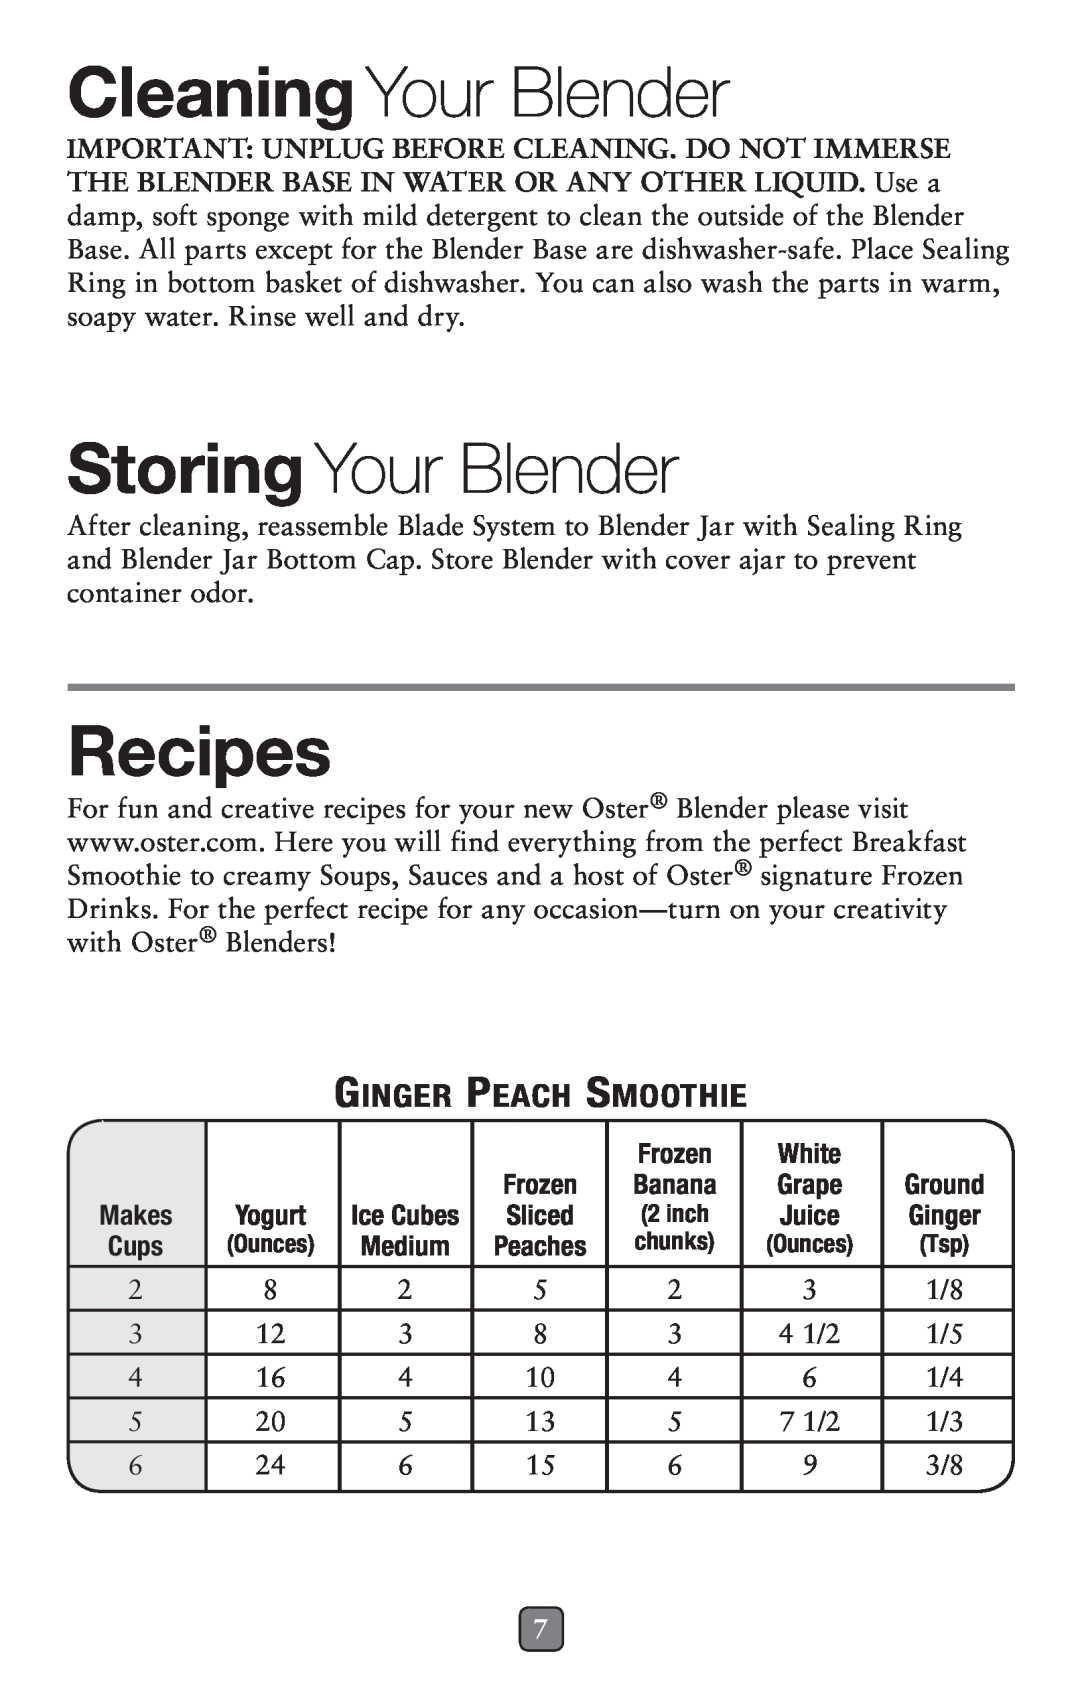 Oster BLSTSS-PZO user manual Cleaning Your Blender, Storing Your Blender, Recipes, Ginger Peach Smoothie, Frozen, White 